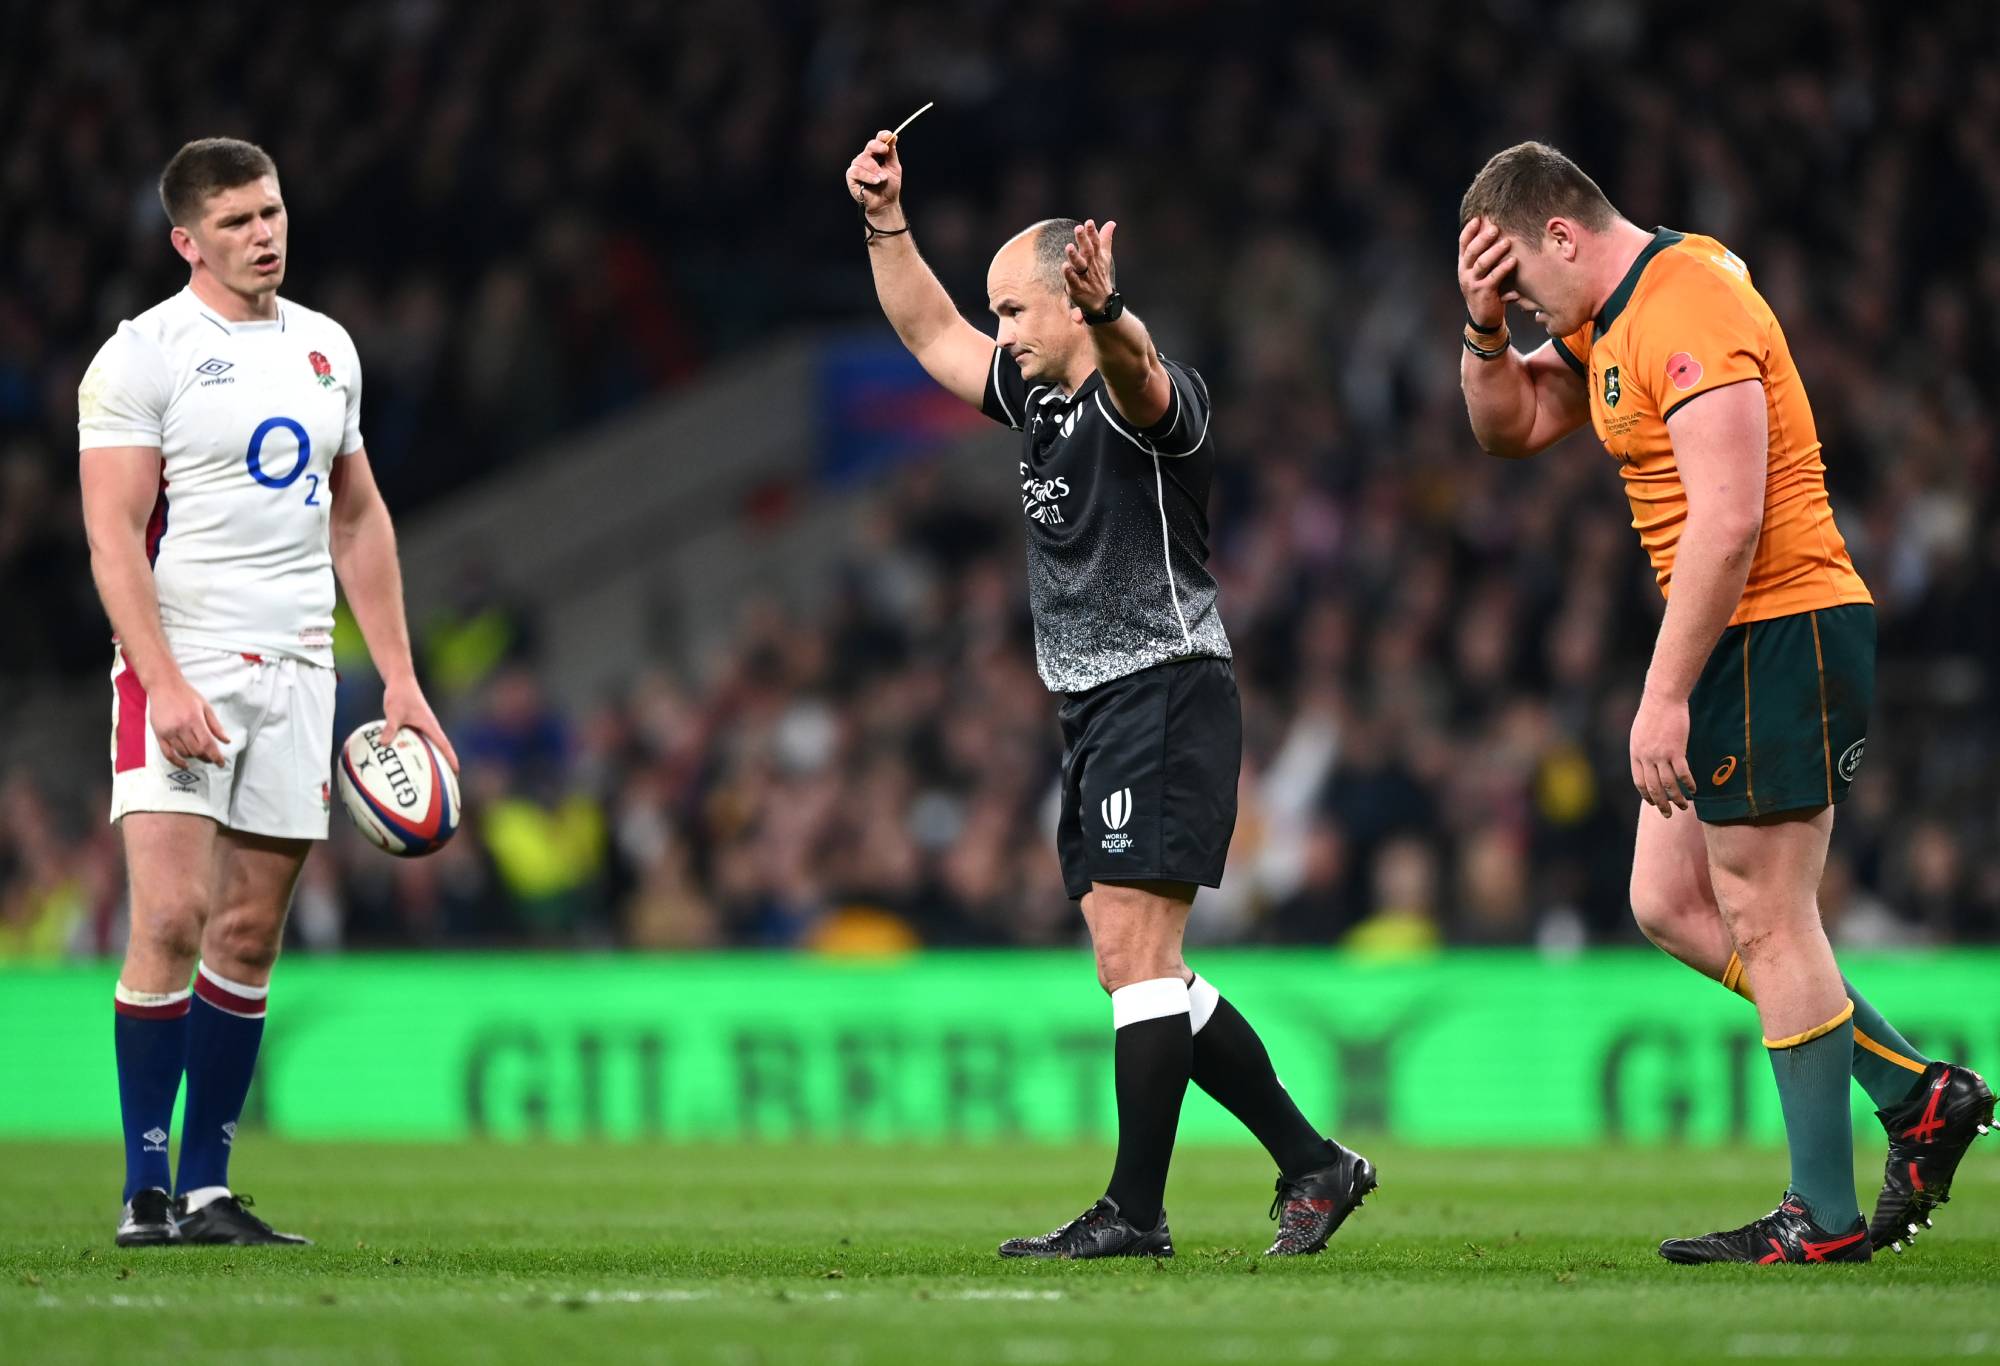 Angus Bell of Australia reacts as he is shown a yellow card by Referee, Jaco Peyper during the Autumn Nations Series match between England and Australia at Twickenham Stadium on November 13, 2021 in London, England. (Photo by Shaun Botterill/Getty Images)